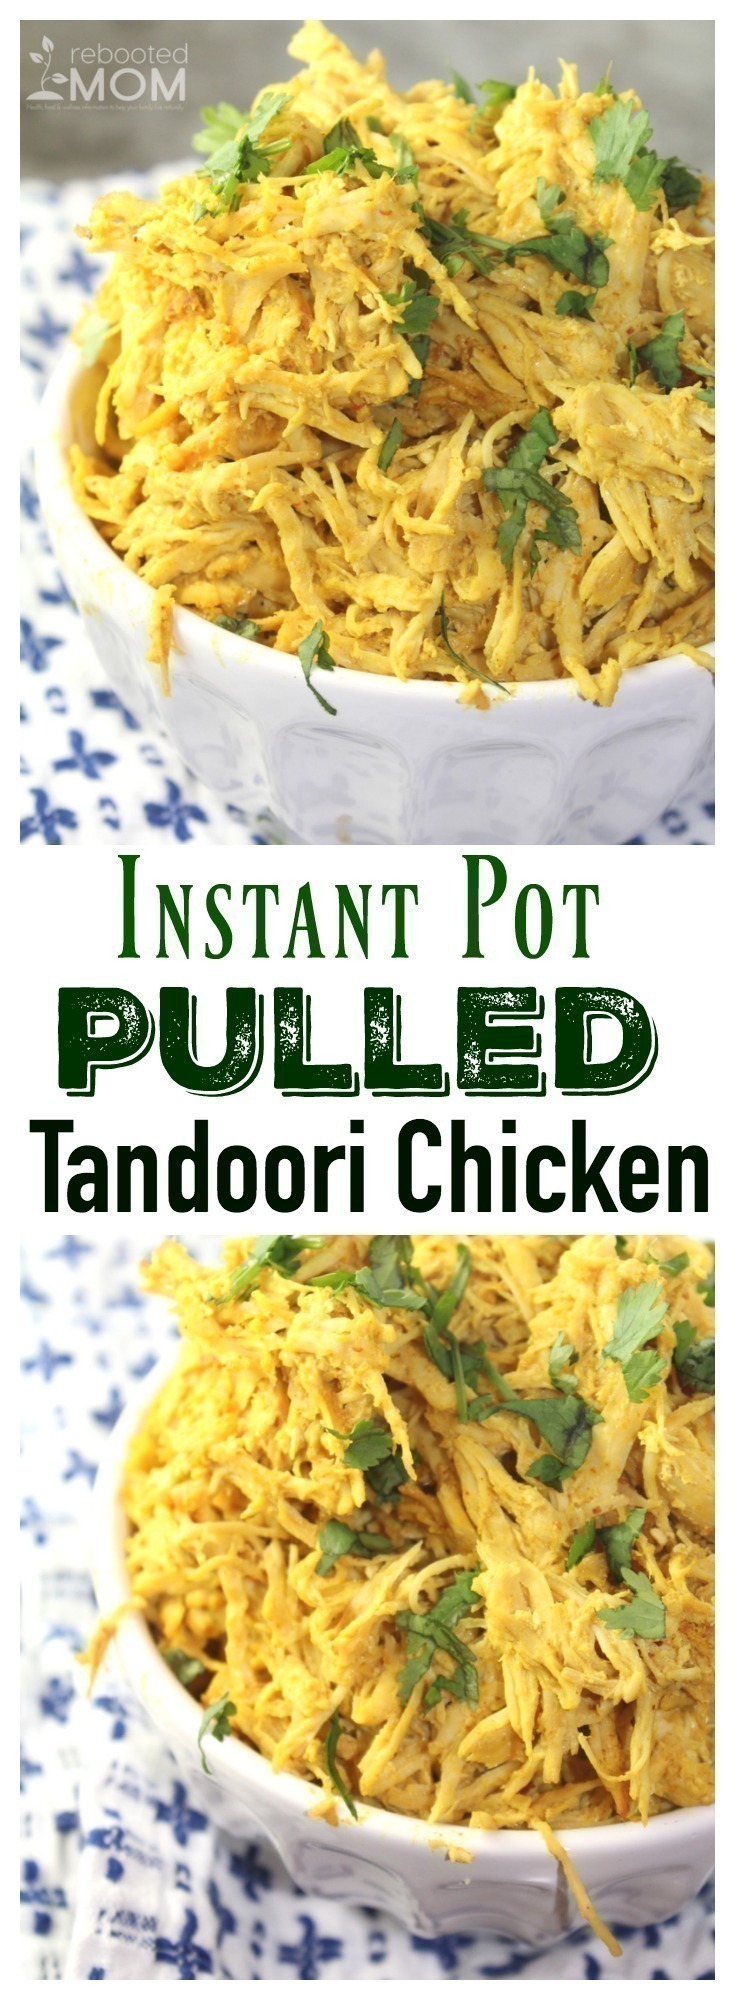 Frozen chicken transformed into saucy, pulled, Tandoori Chicken bathed in a mixture of delicious spices, and garnished with cilantro. It's wonderful served over rice and is incredibly easy to make!